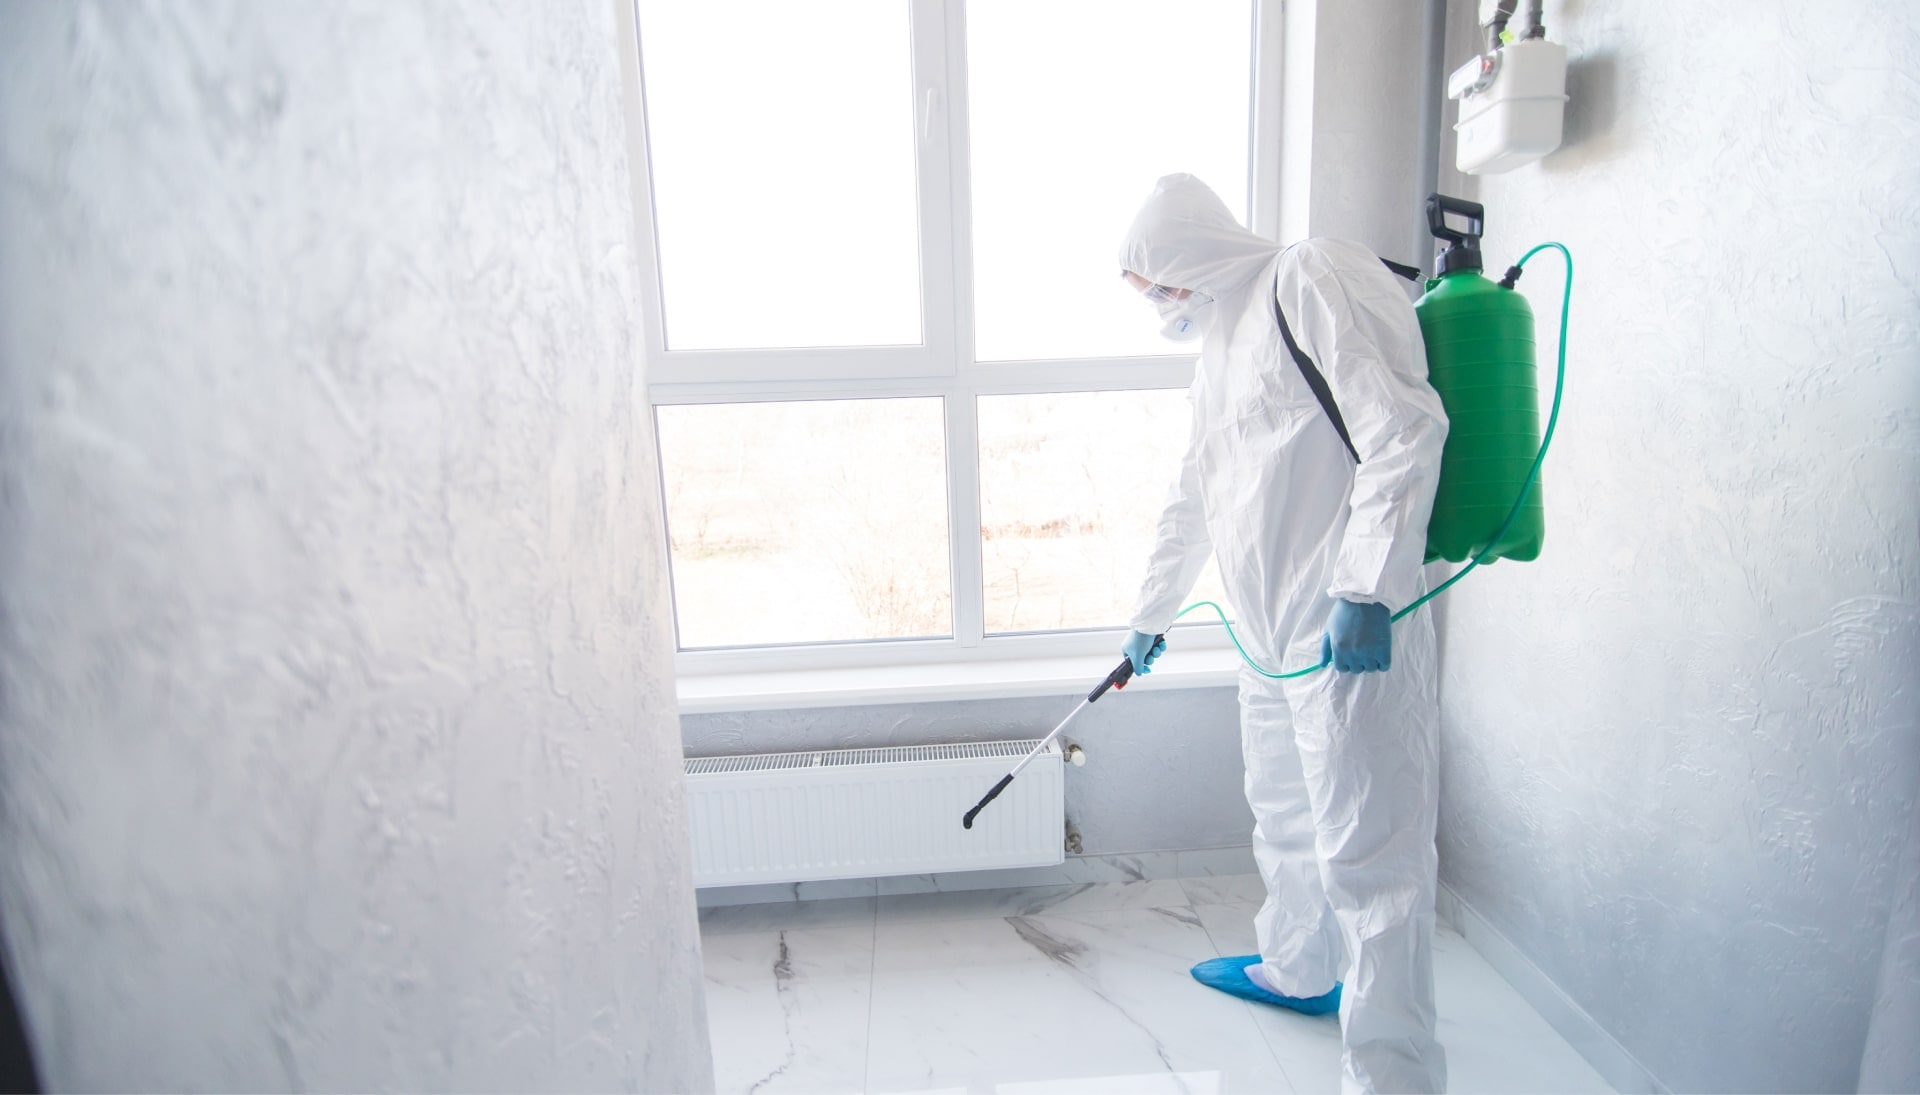 We provide the highest-quality mold inspection, testing, and removal services in the The Villages, Florida area.